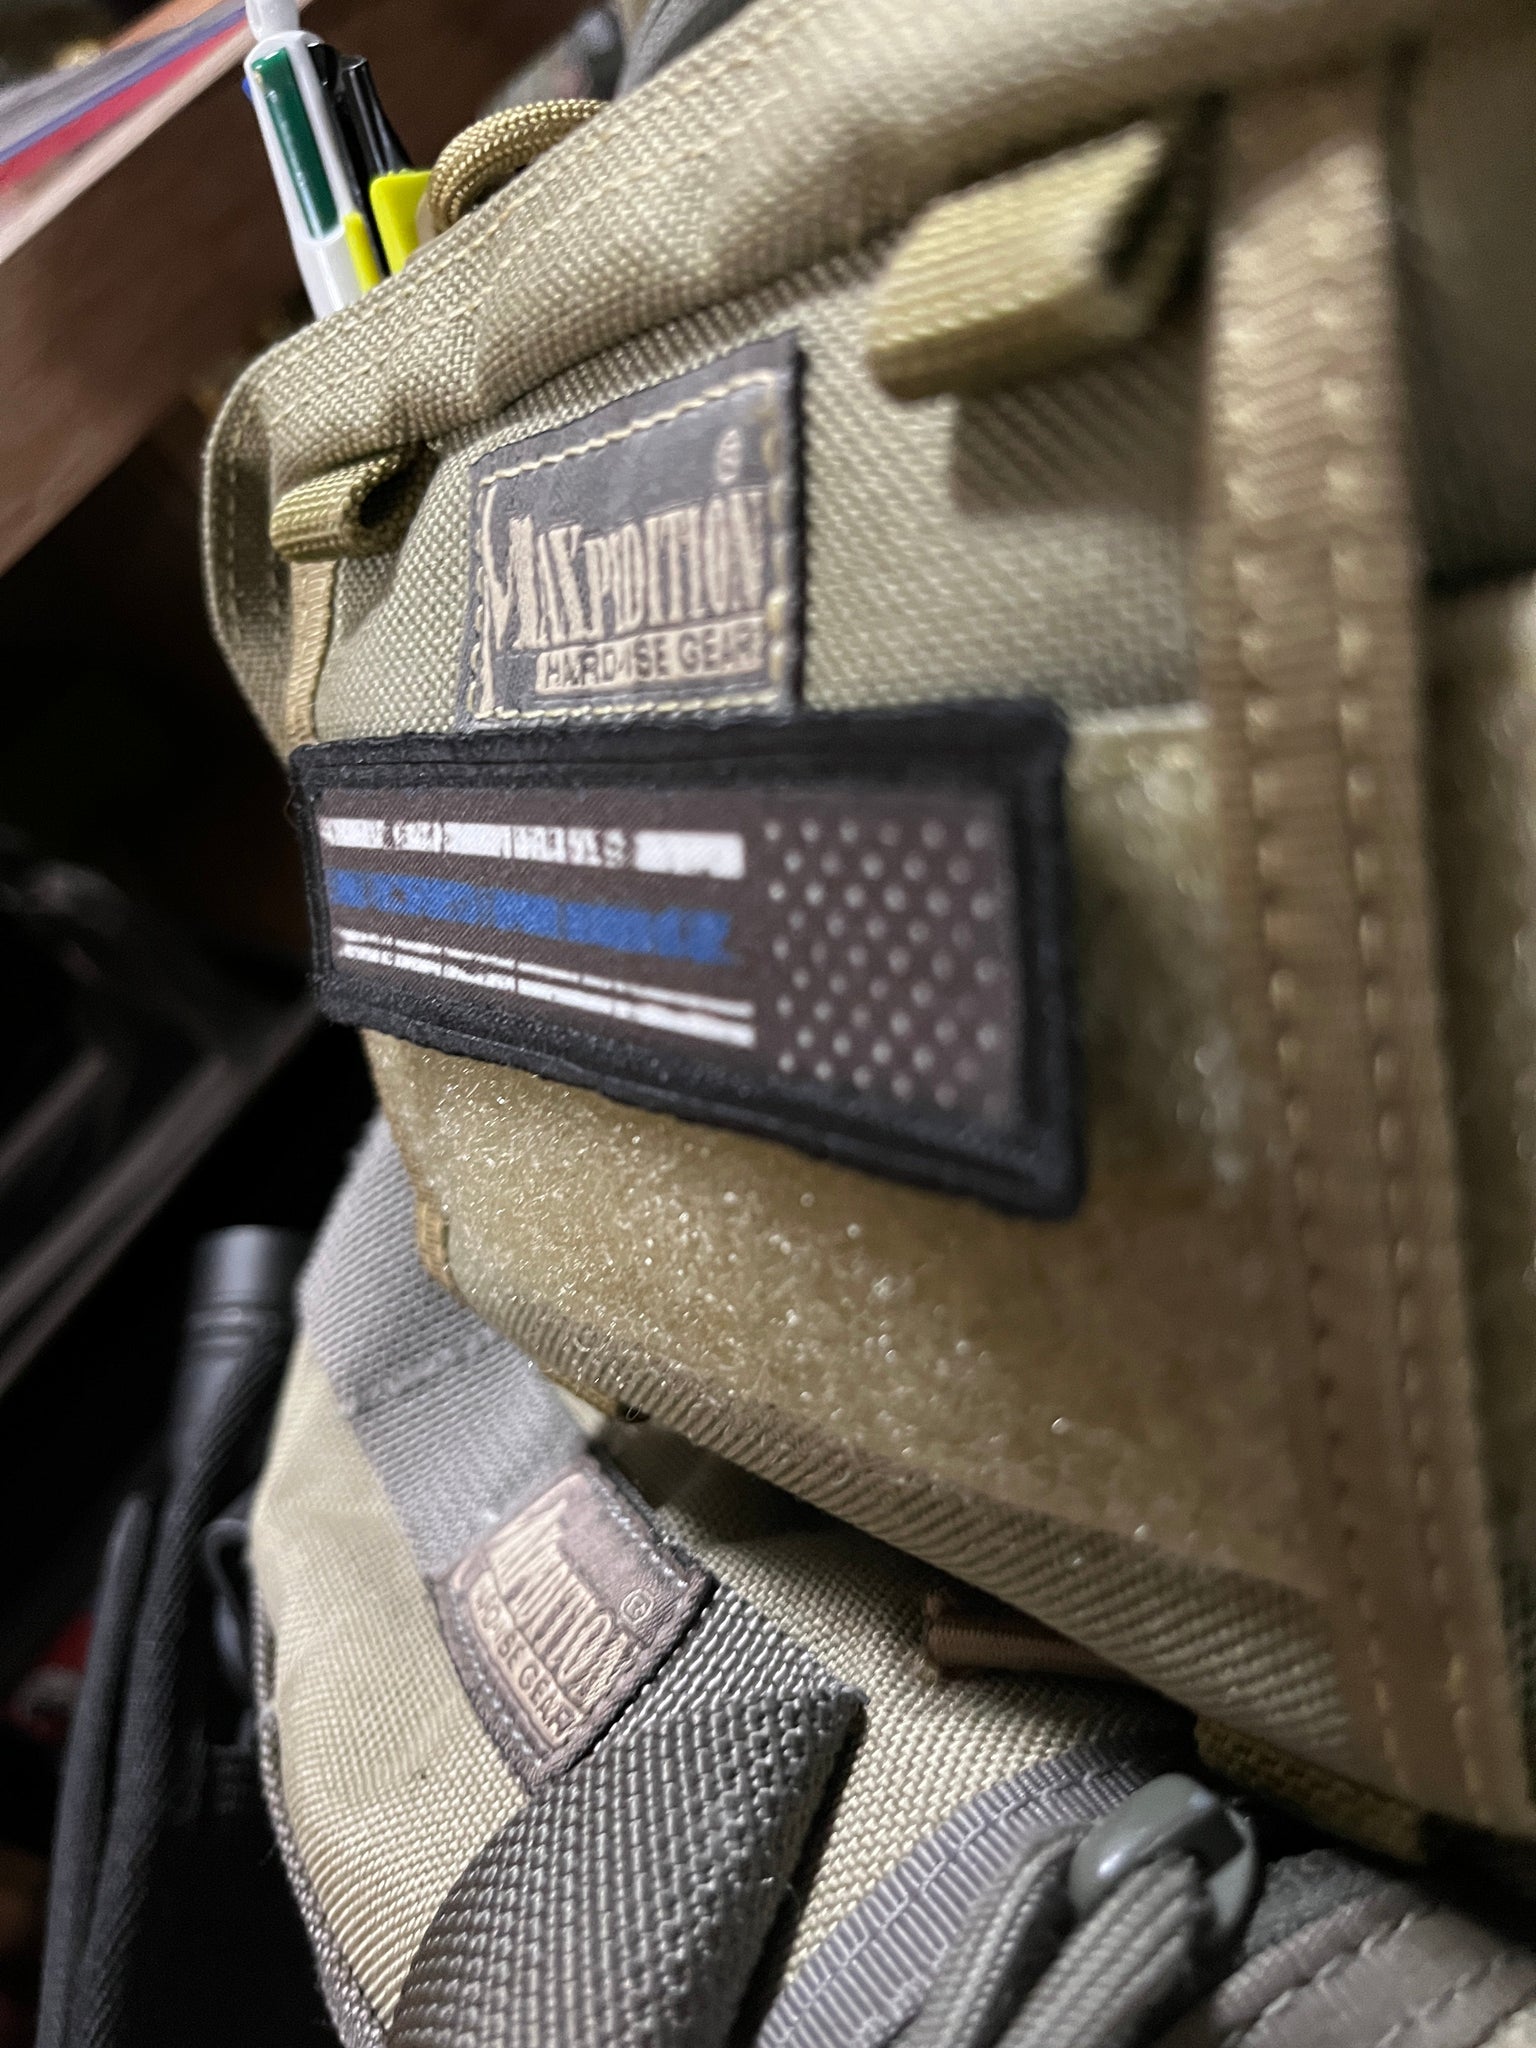 5.11 Tactical morale patches now available